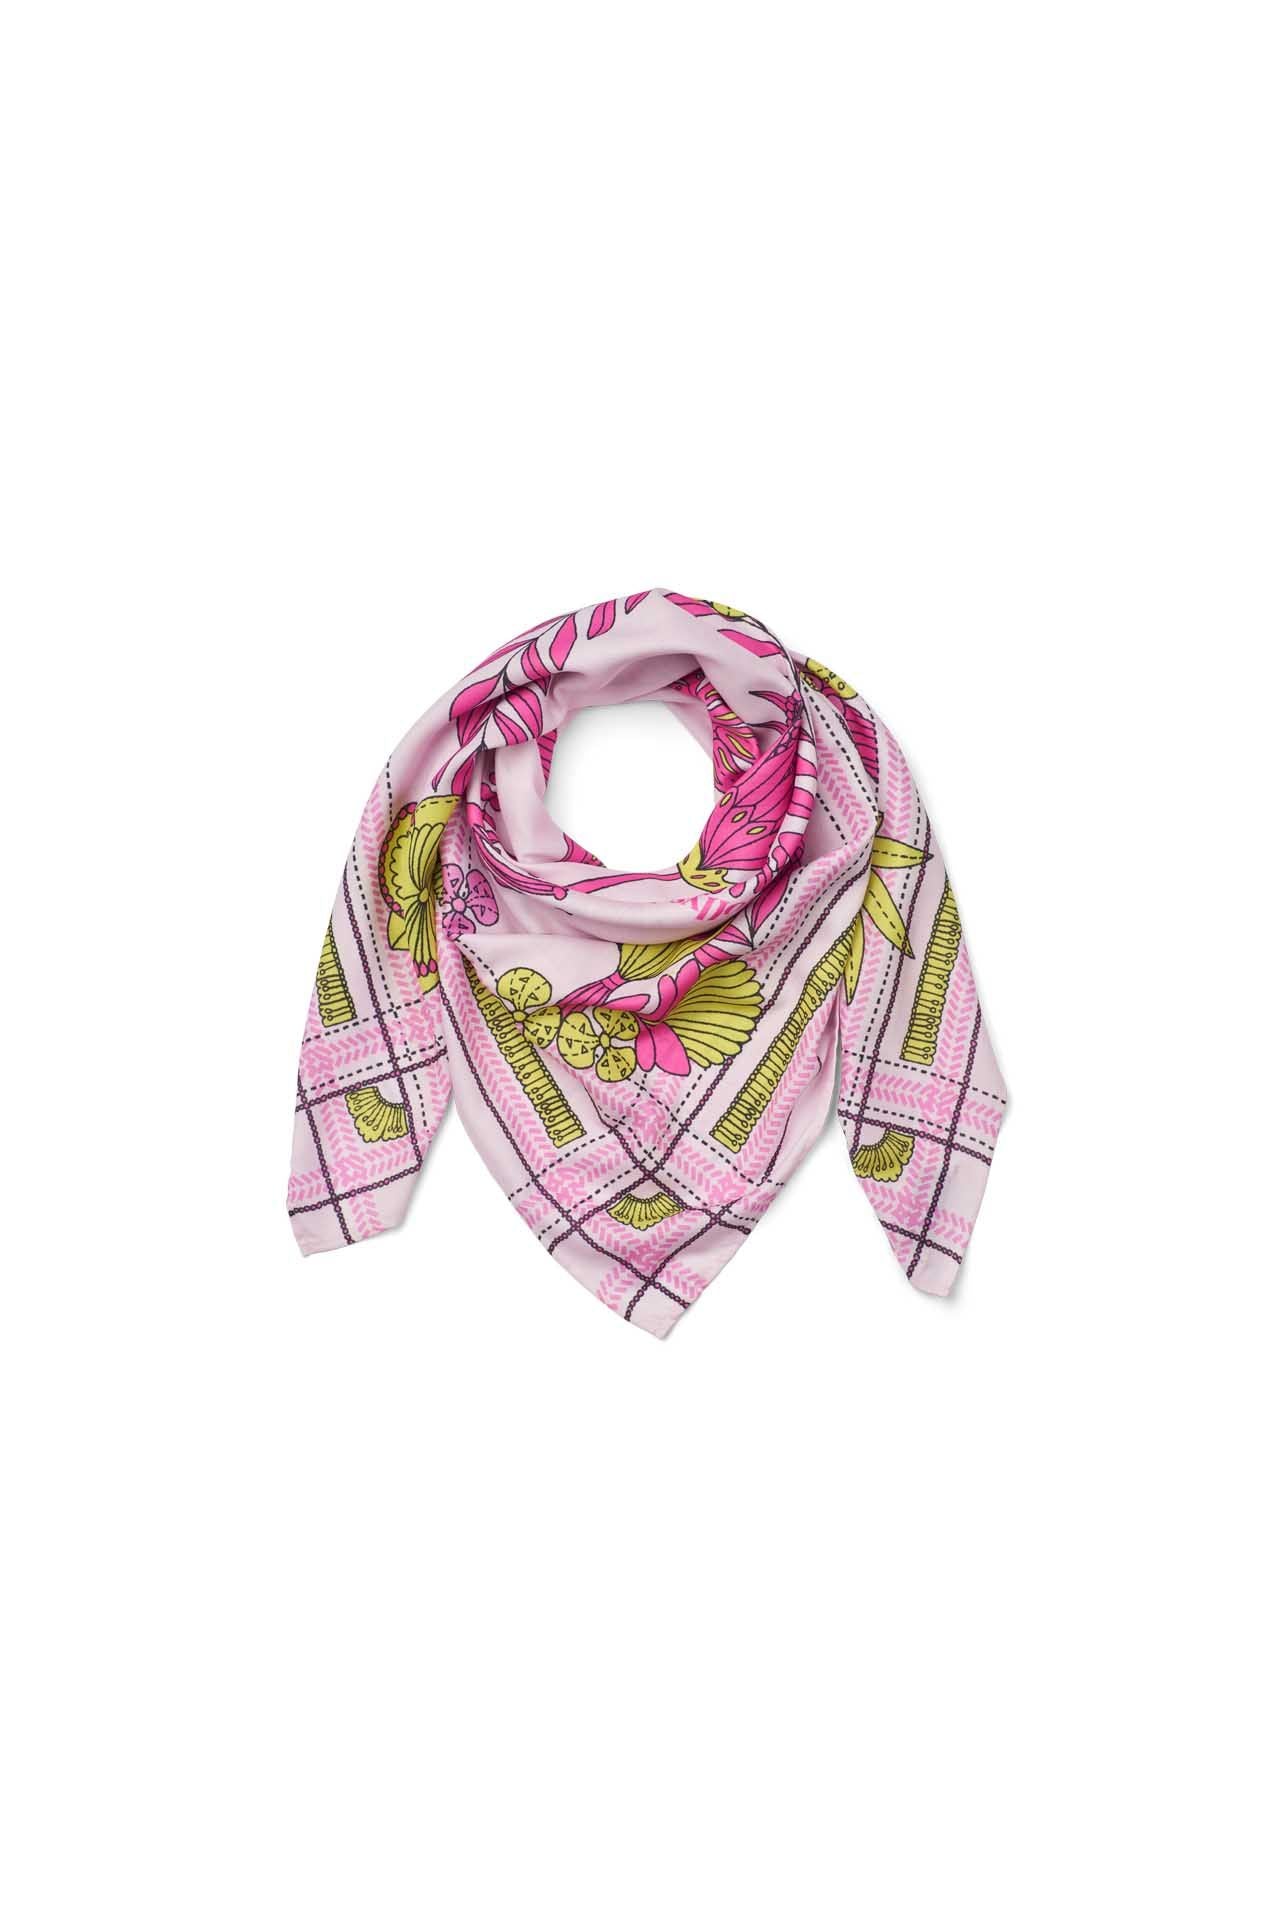 Lollys Laundry - Pink Scarf